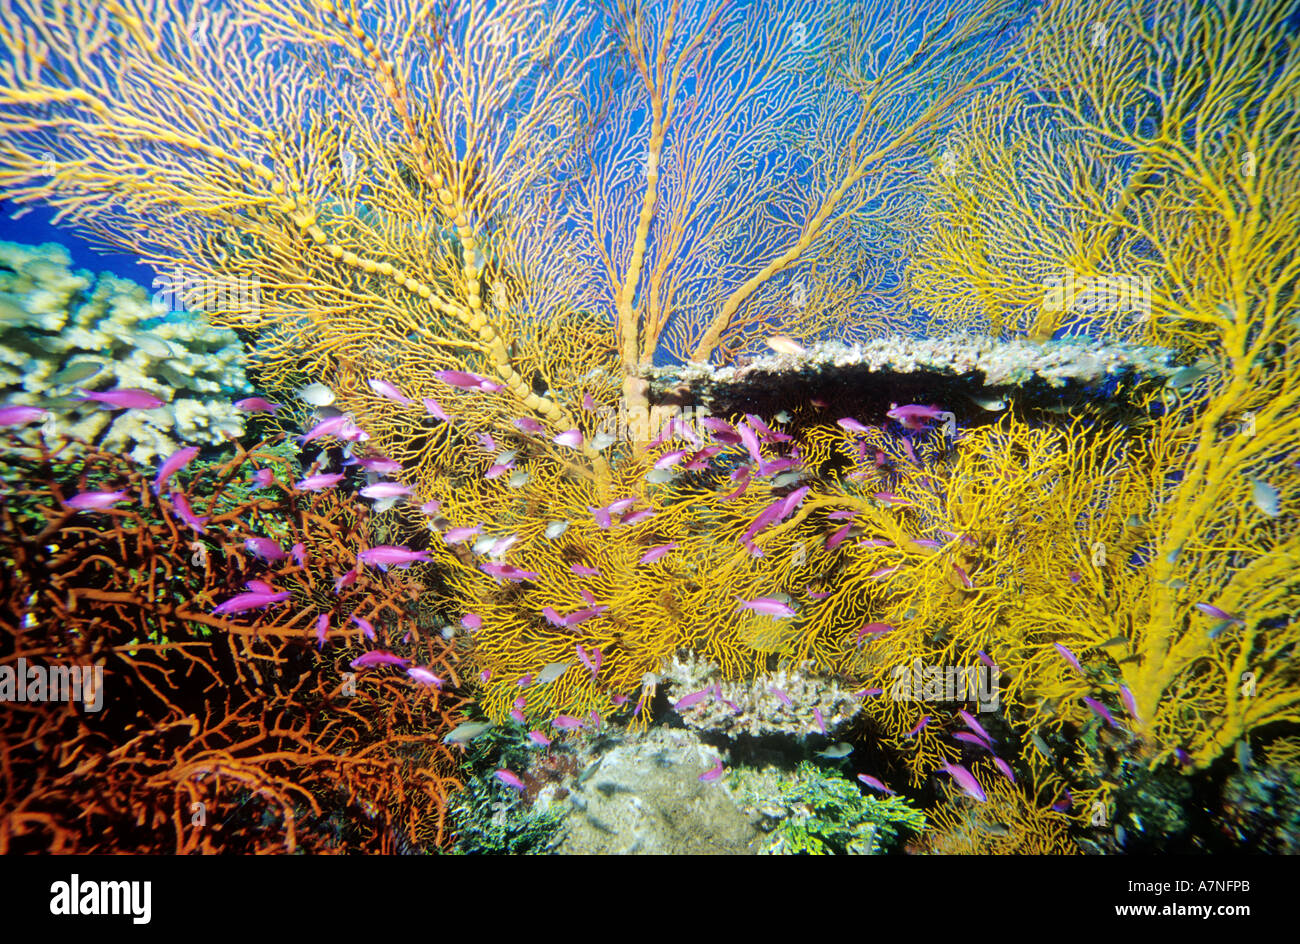 Australia, Great Barrier Reef, underwater photo, yellow sea-fan corals, acroporas(hard and white corals), purple anthias fishes Stock Photo